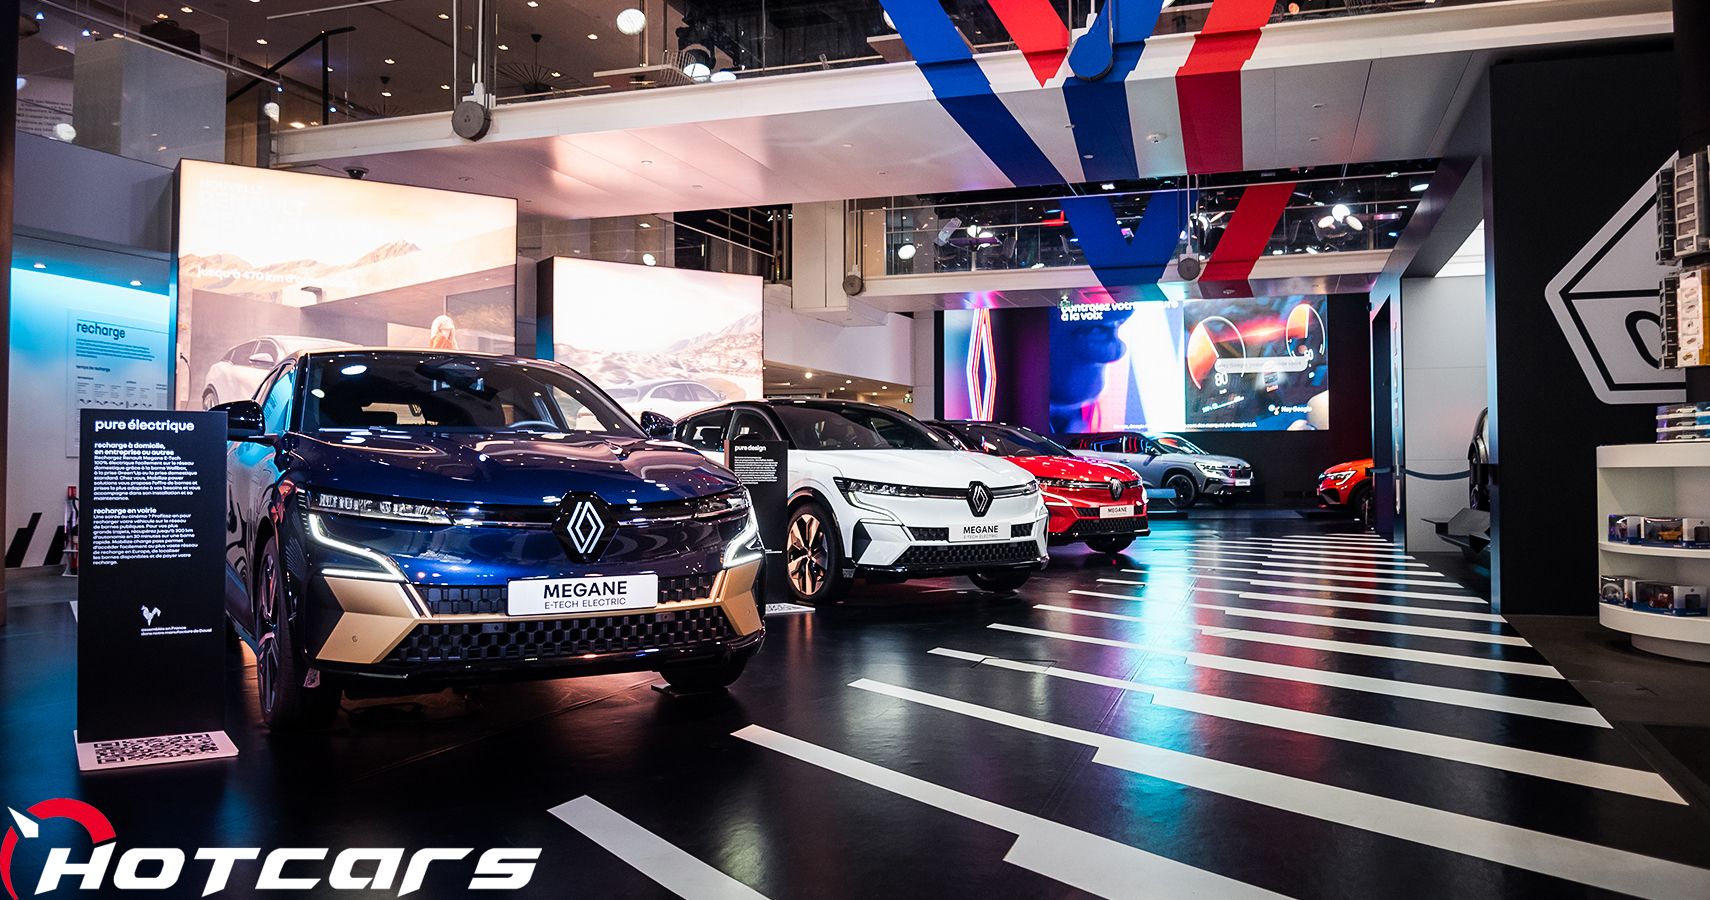 French flag display with blue, white and red Renault Mégane